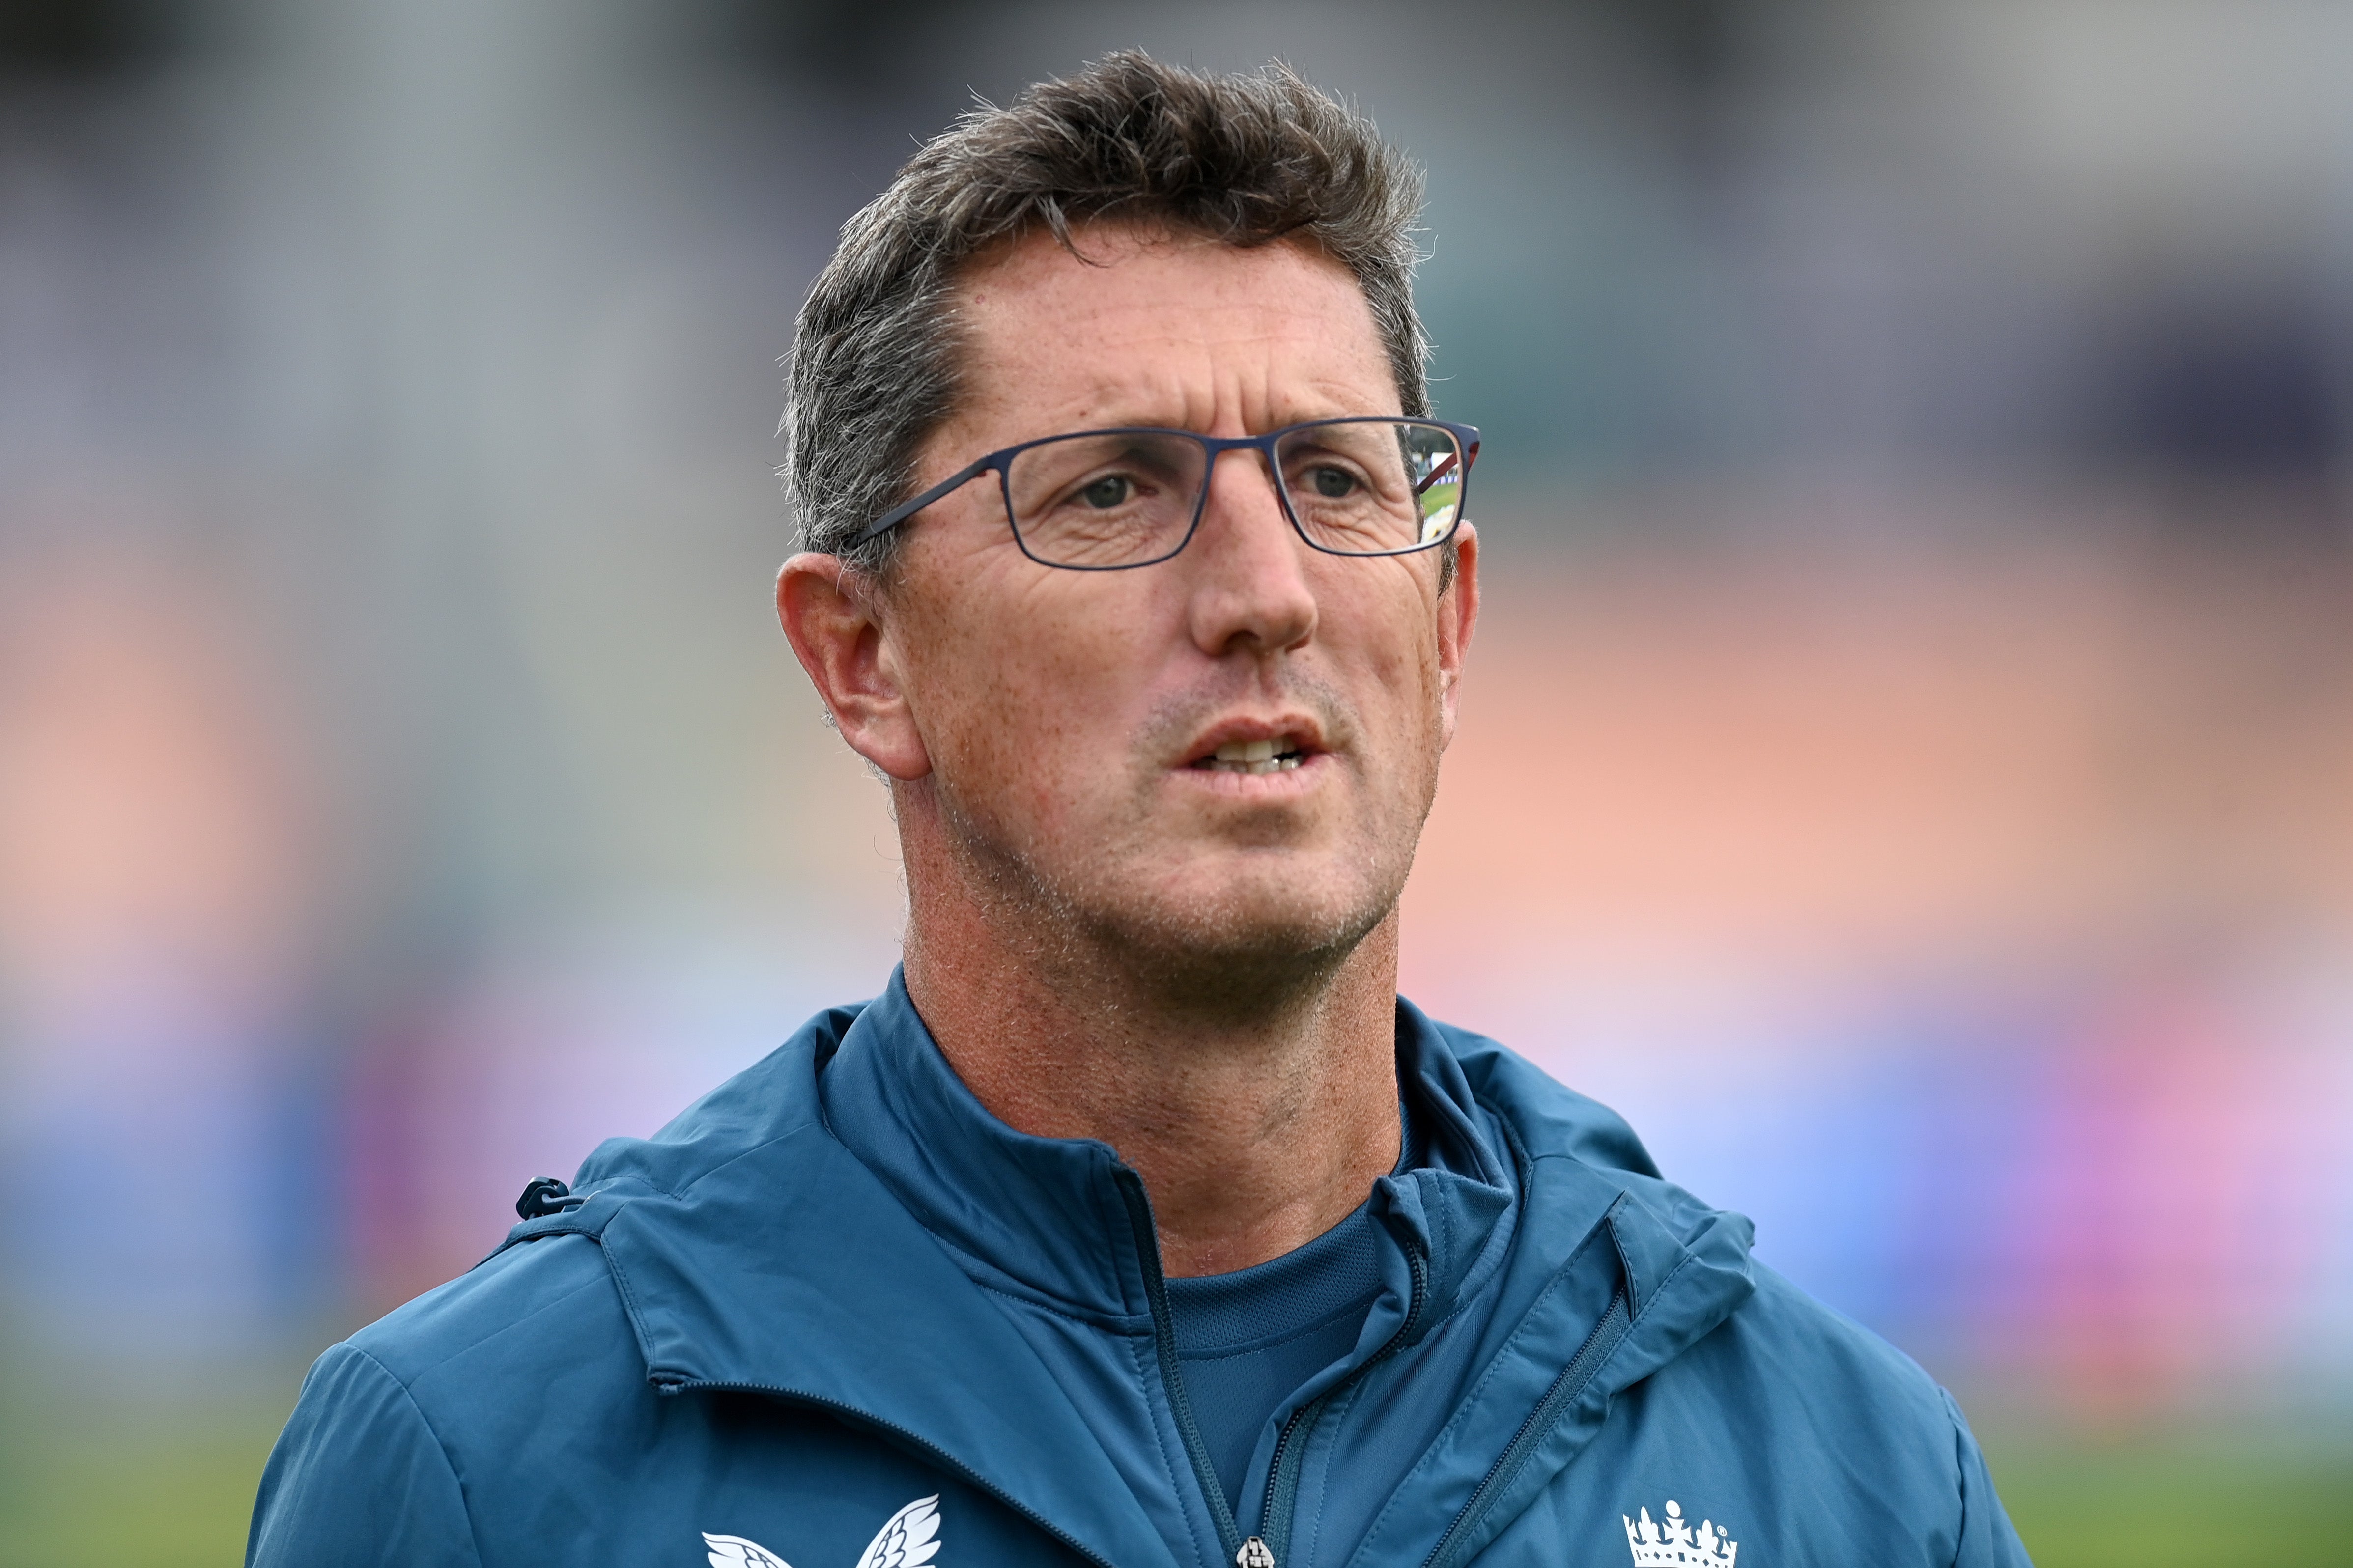 Jon Lewis expressed his sympathies to Worcestershire